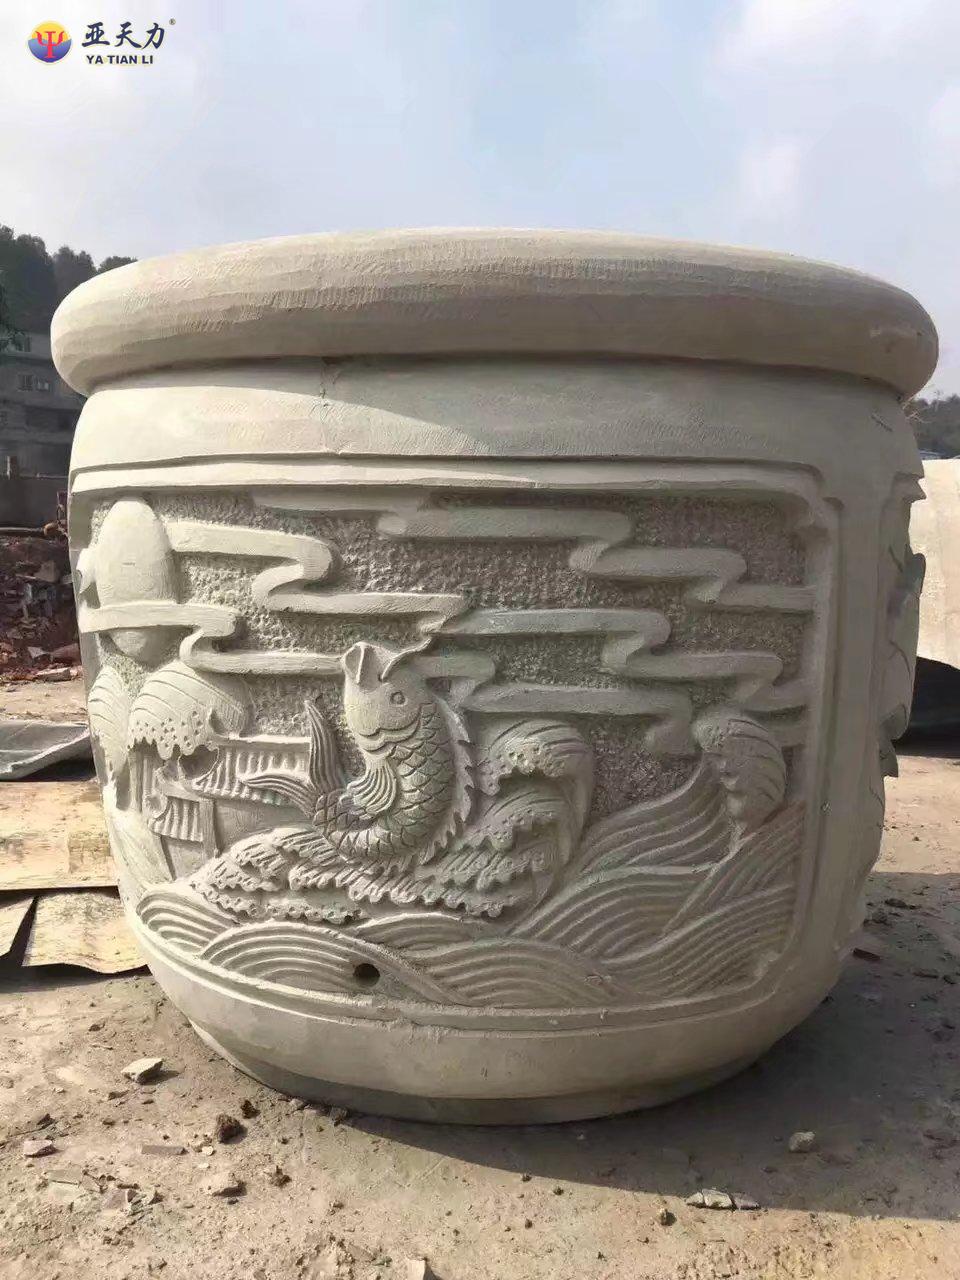 Stone Carving of Fish Tanks